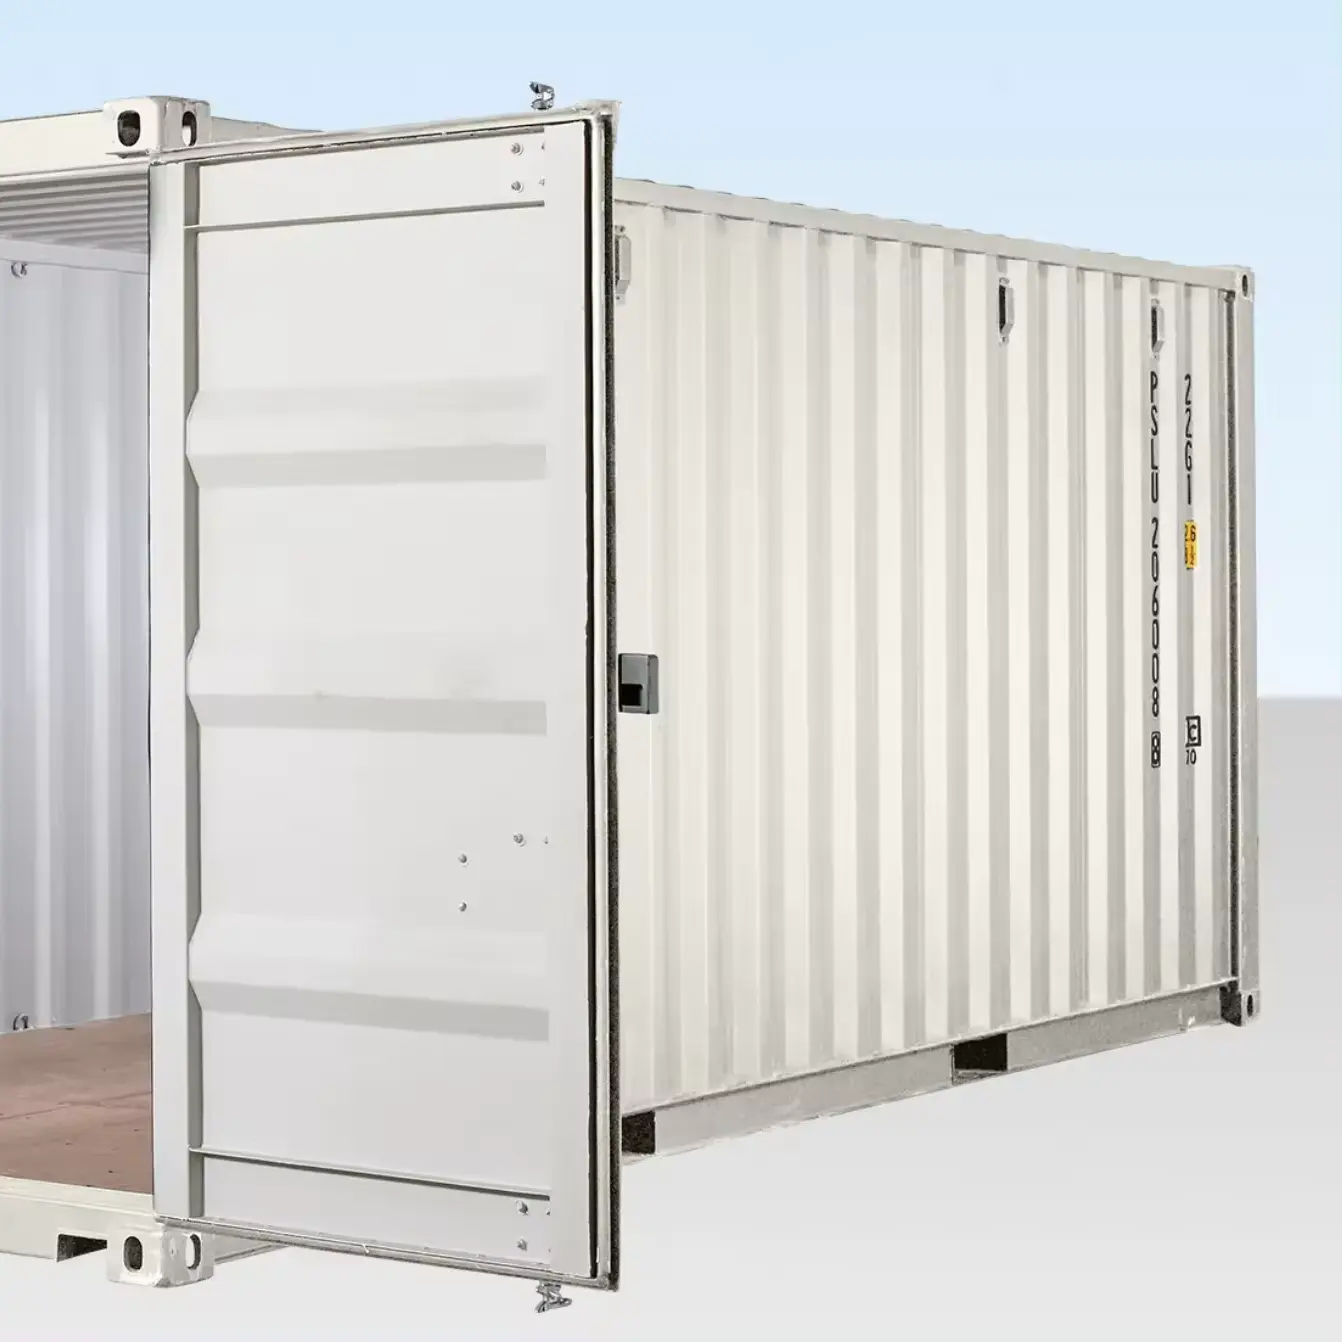 "Flexible Wholesale Shipping Containers Available Now"